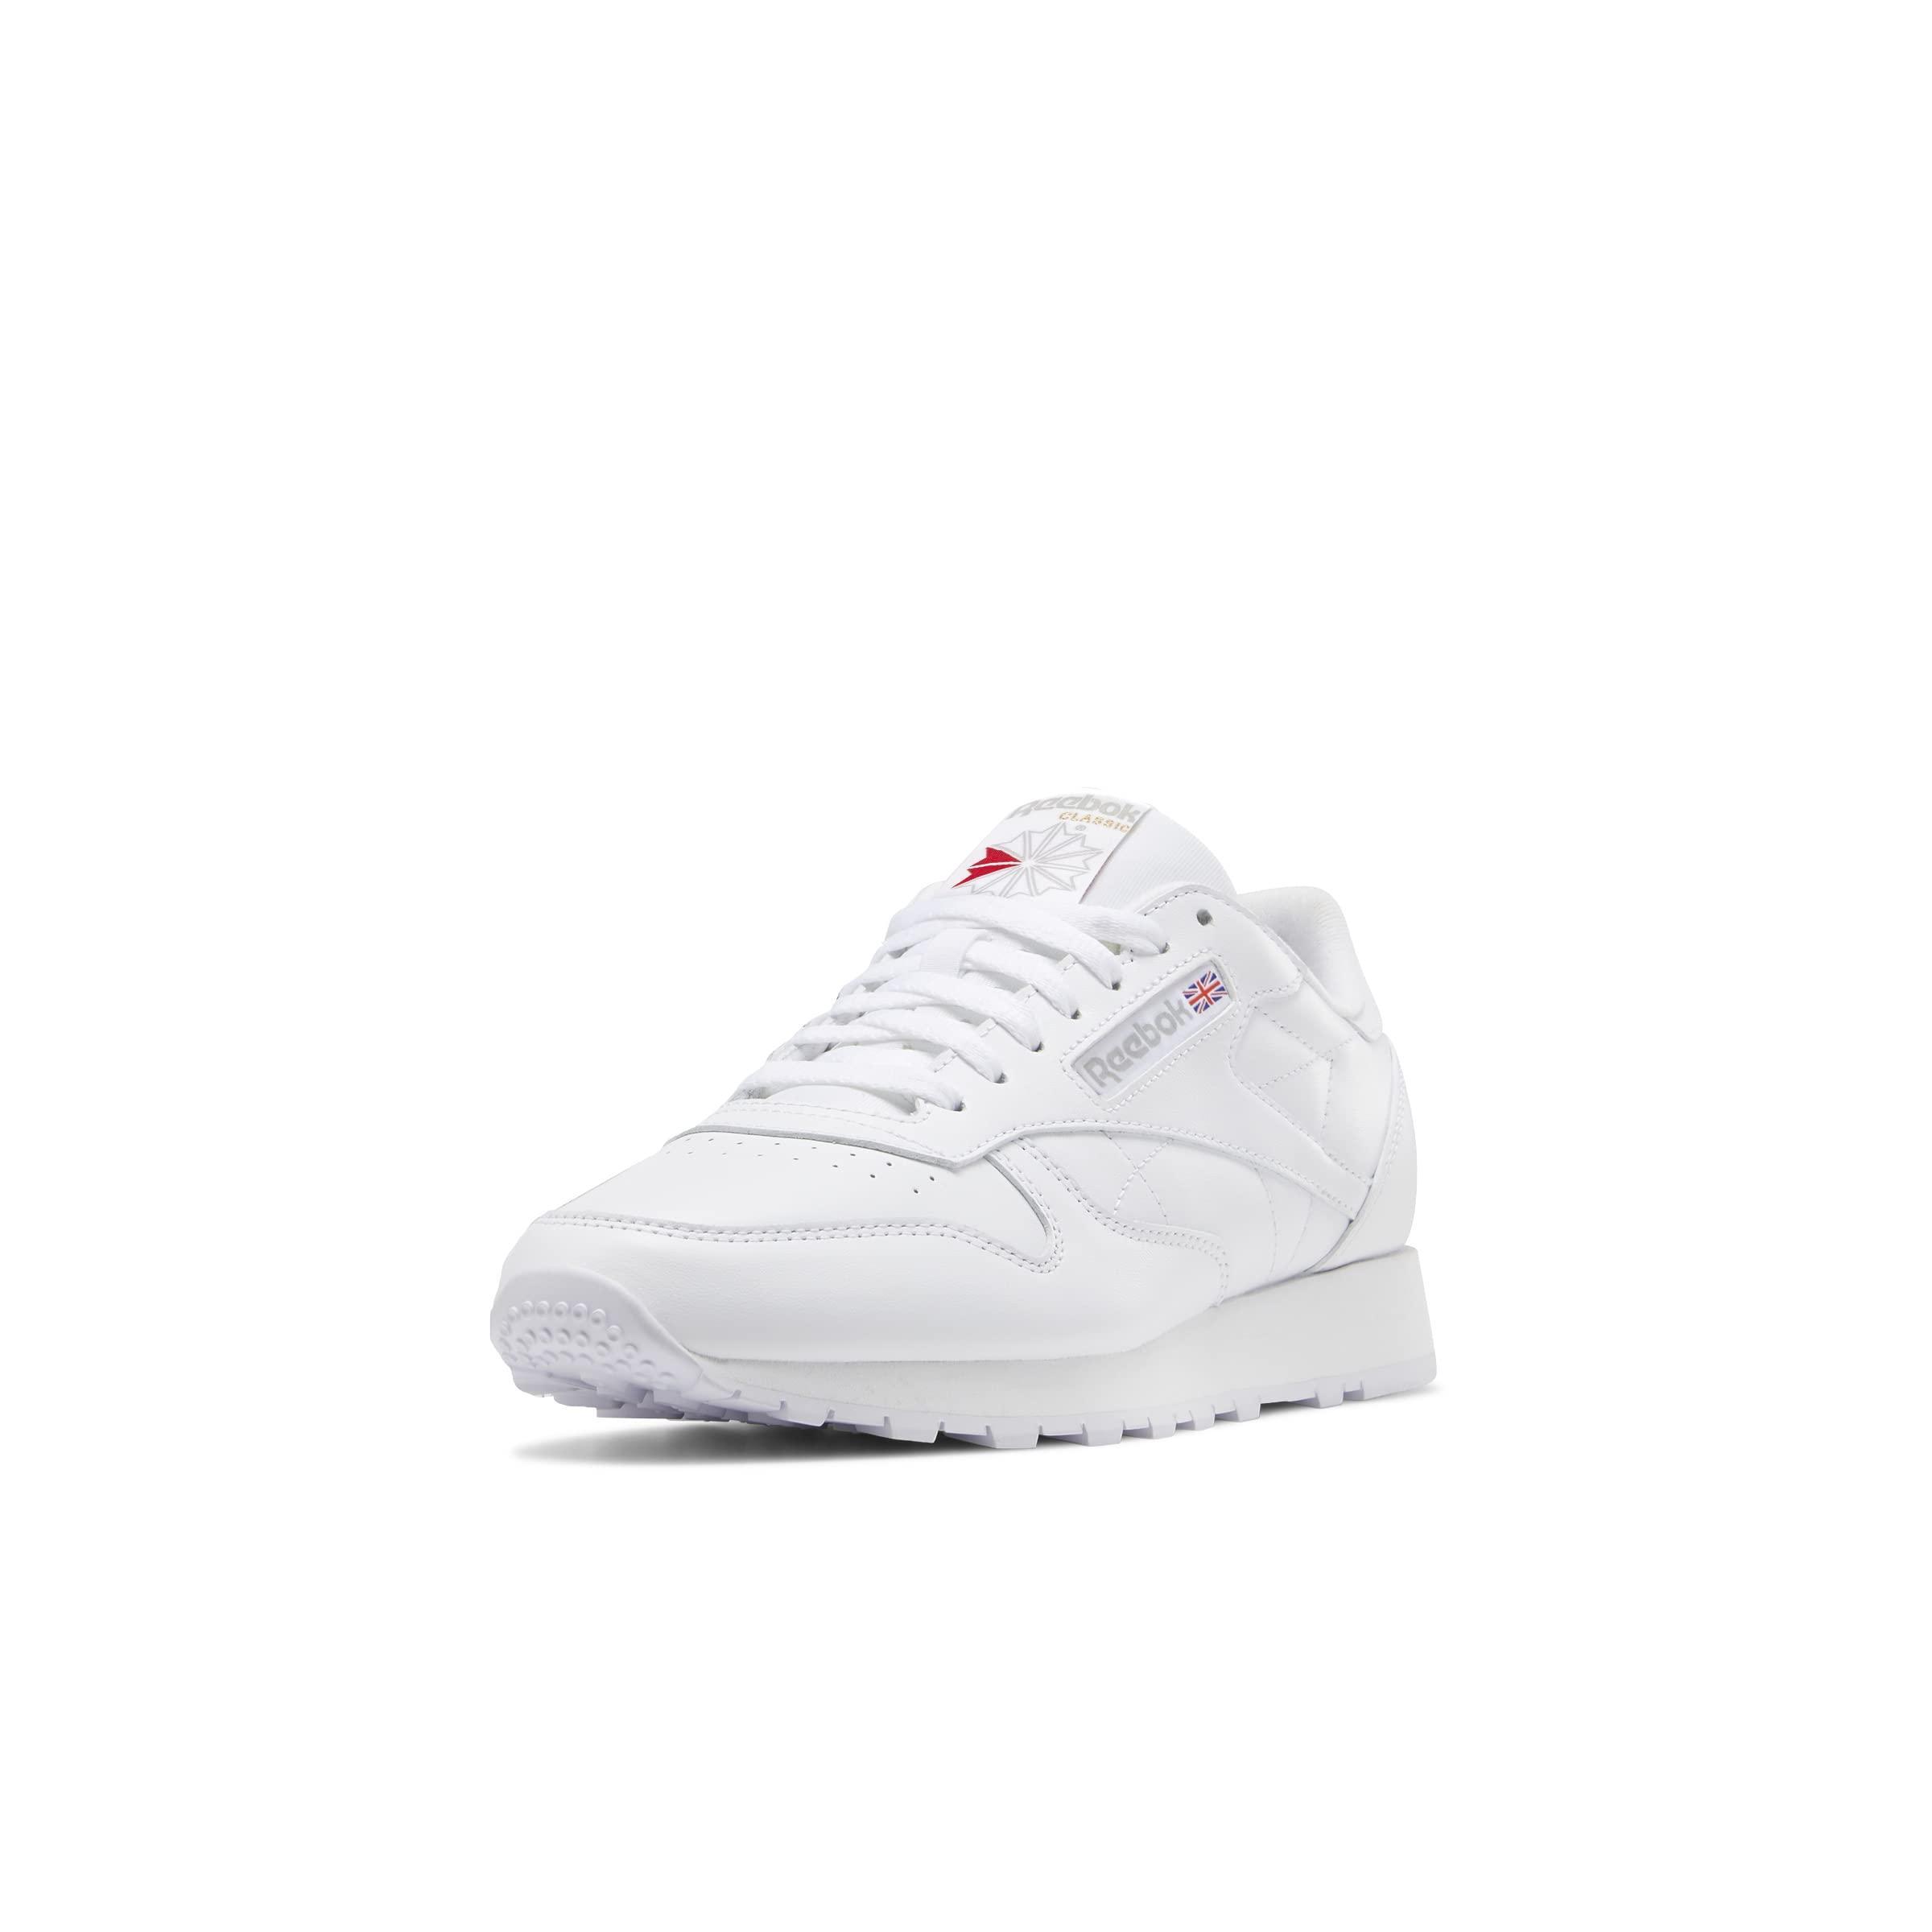 Reebok Unisex-Adult Classic Leather Sneaker 9.5 Women/8 Men Ftwr White/Ftwr White/Pure Grey 3 Product Image